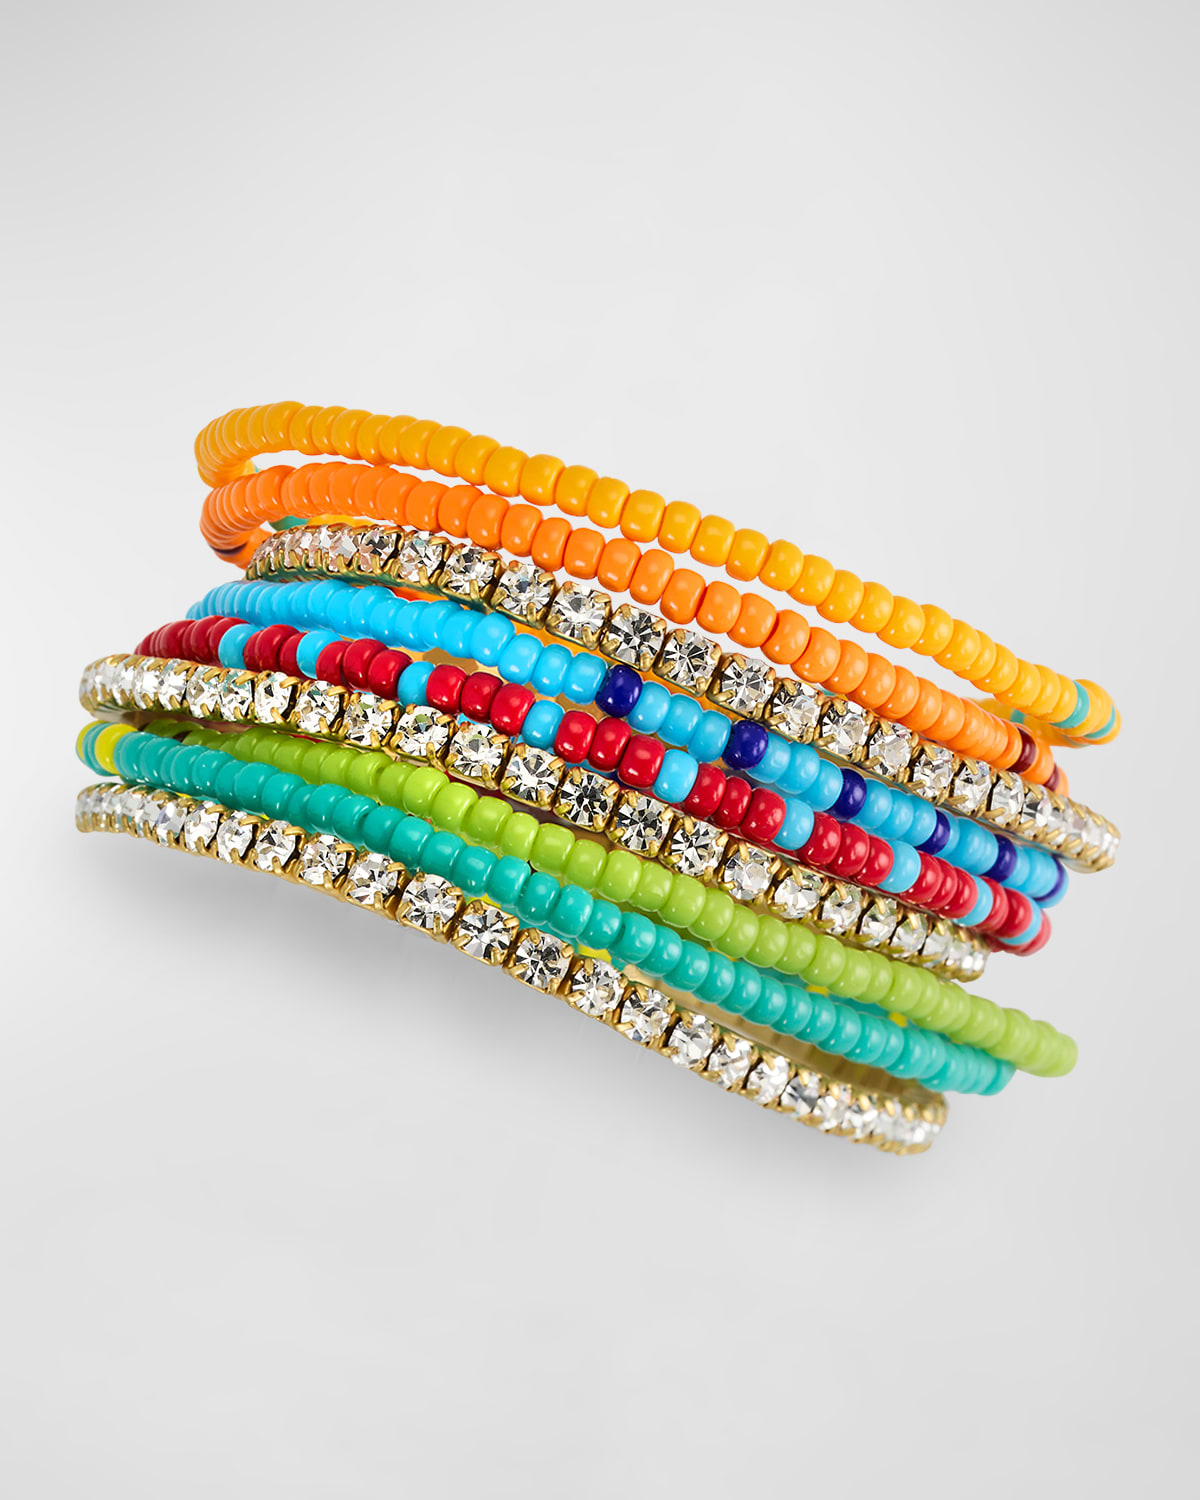 Just Another Day in Paradise Bracelets, Set of 9